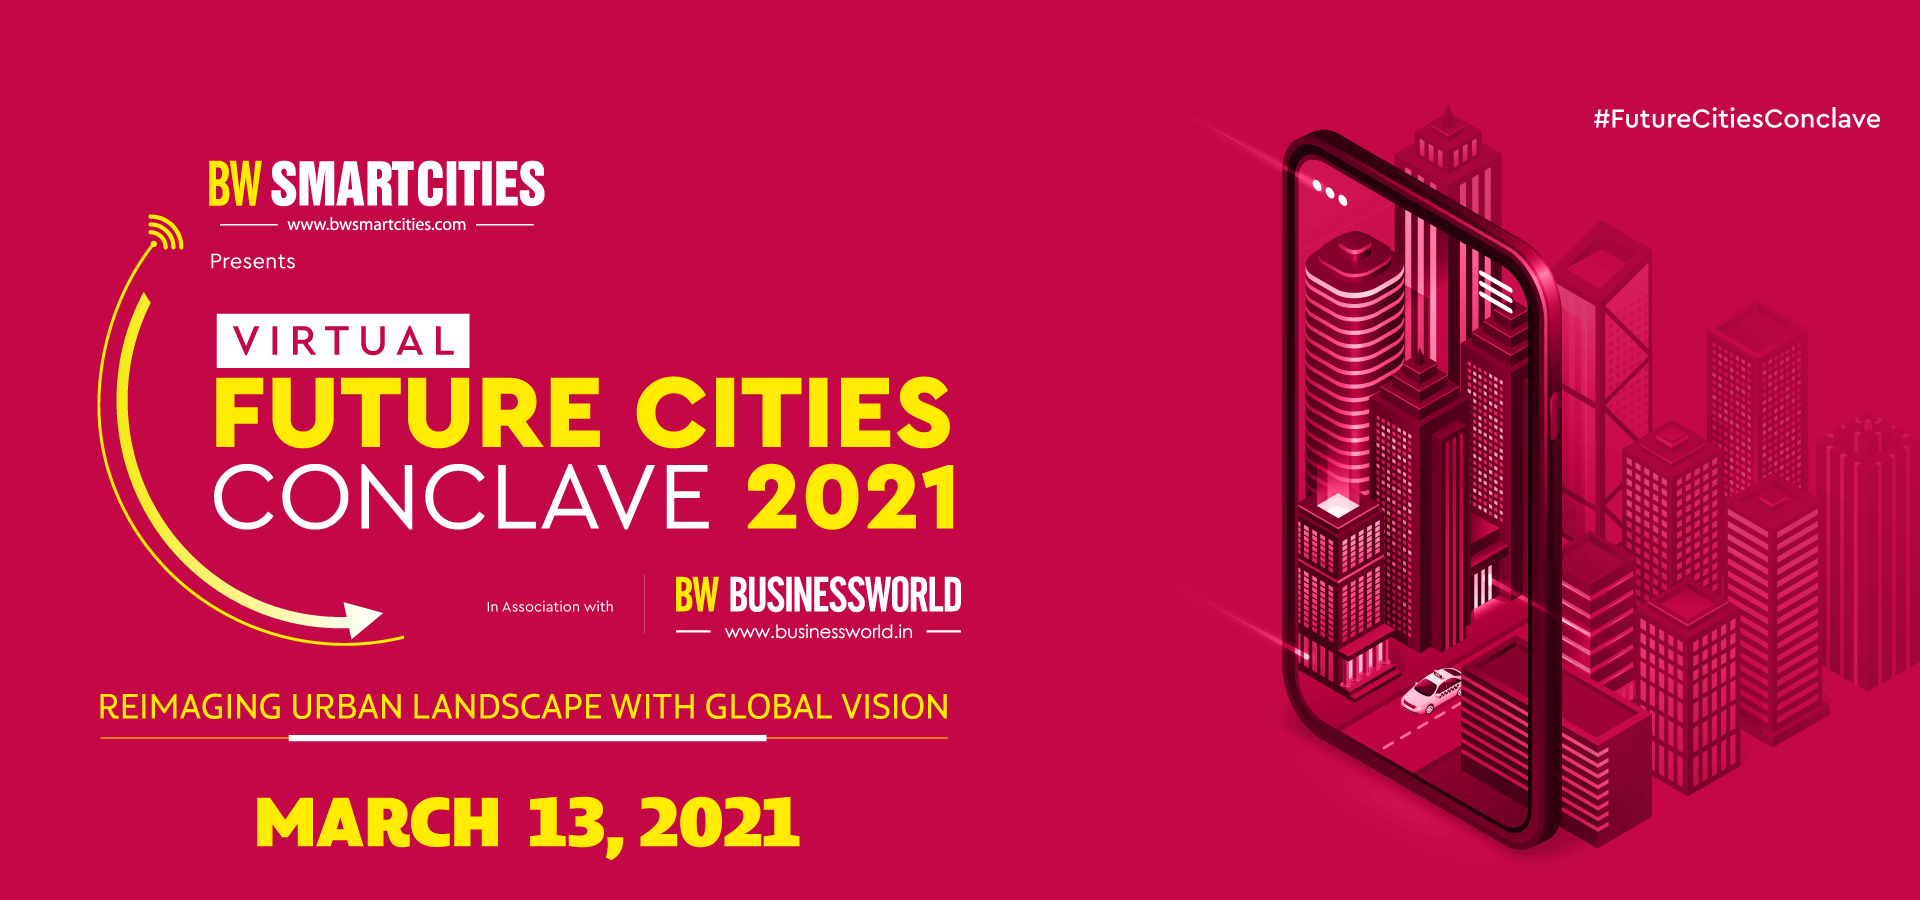 Future Cities Conclave 2021